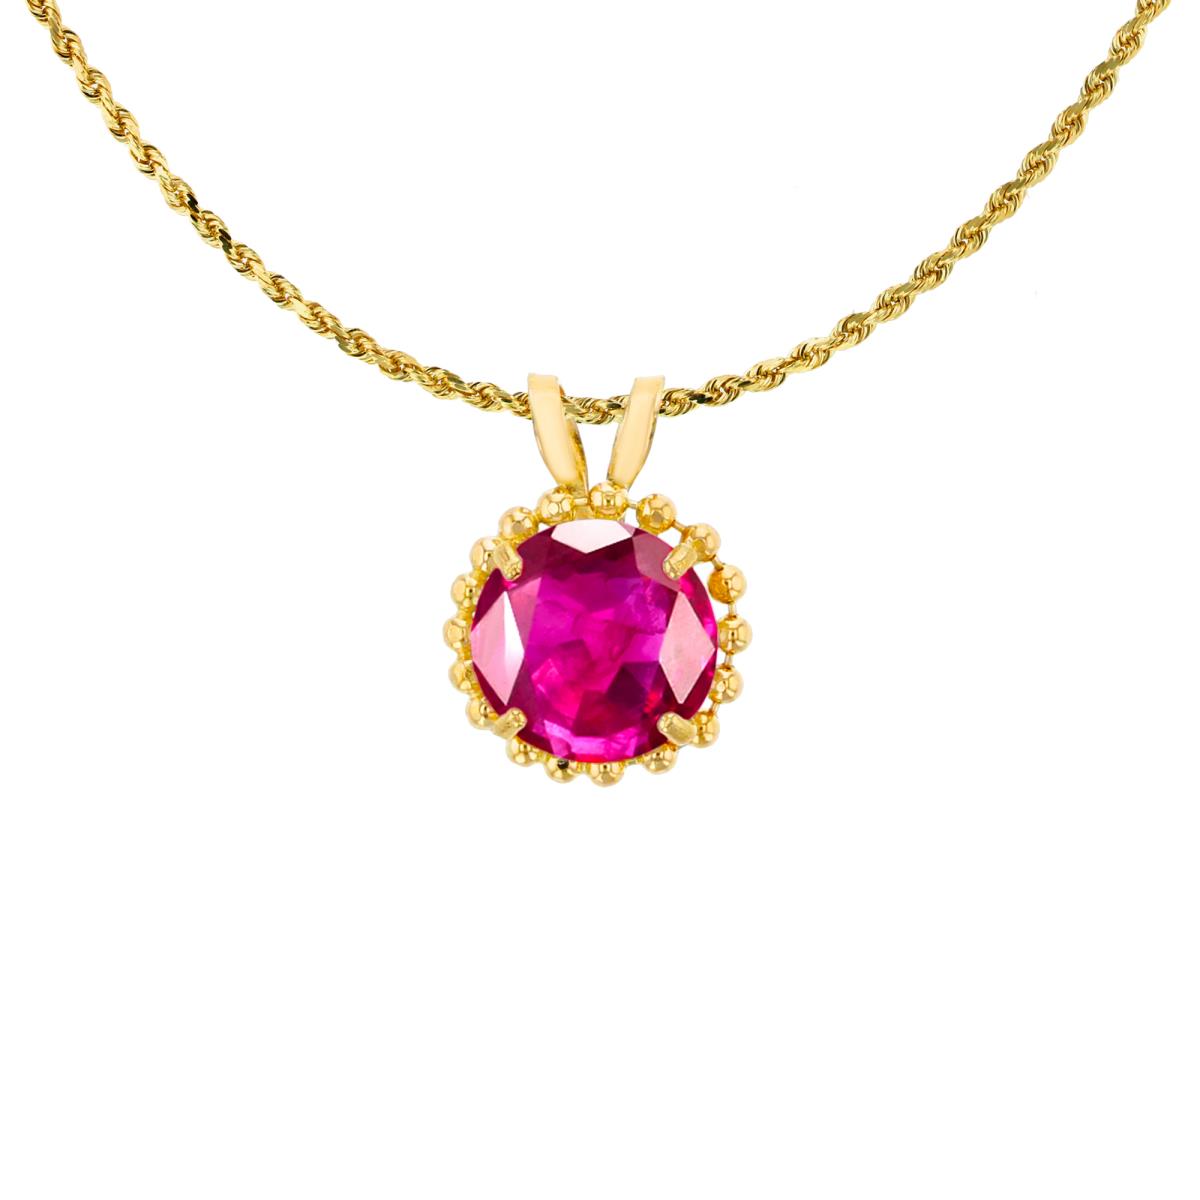 14K Yellow Gold 6mm Rd Cut Glass Filled Ruby with Bead Frame Rabbit Ear 18" Necklace